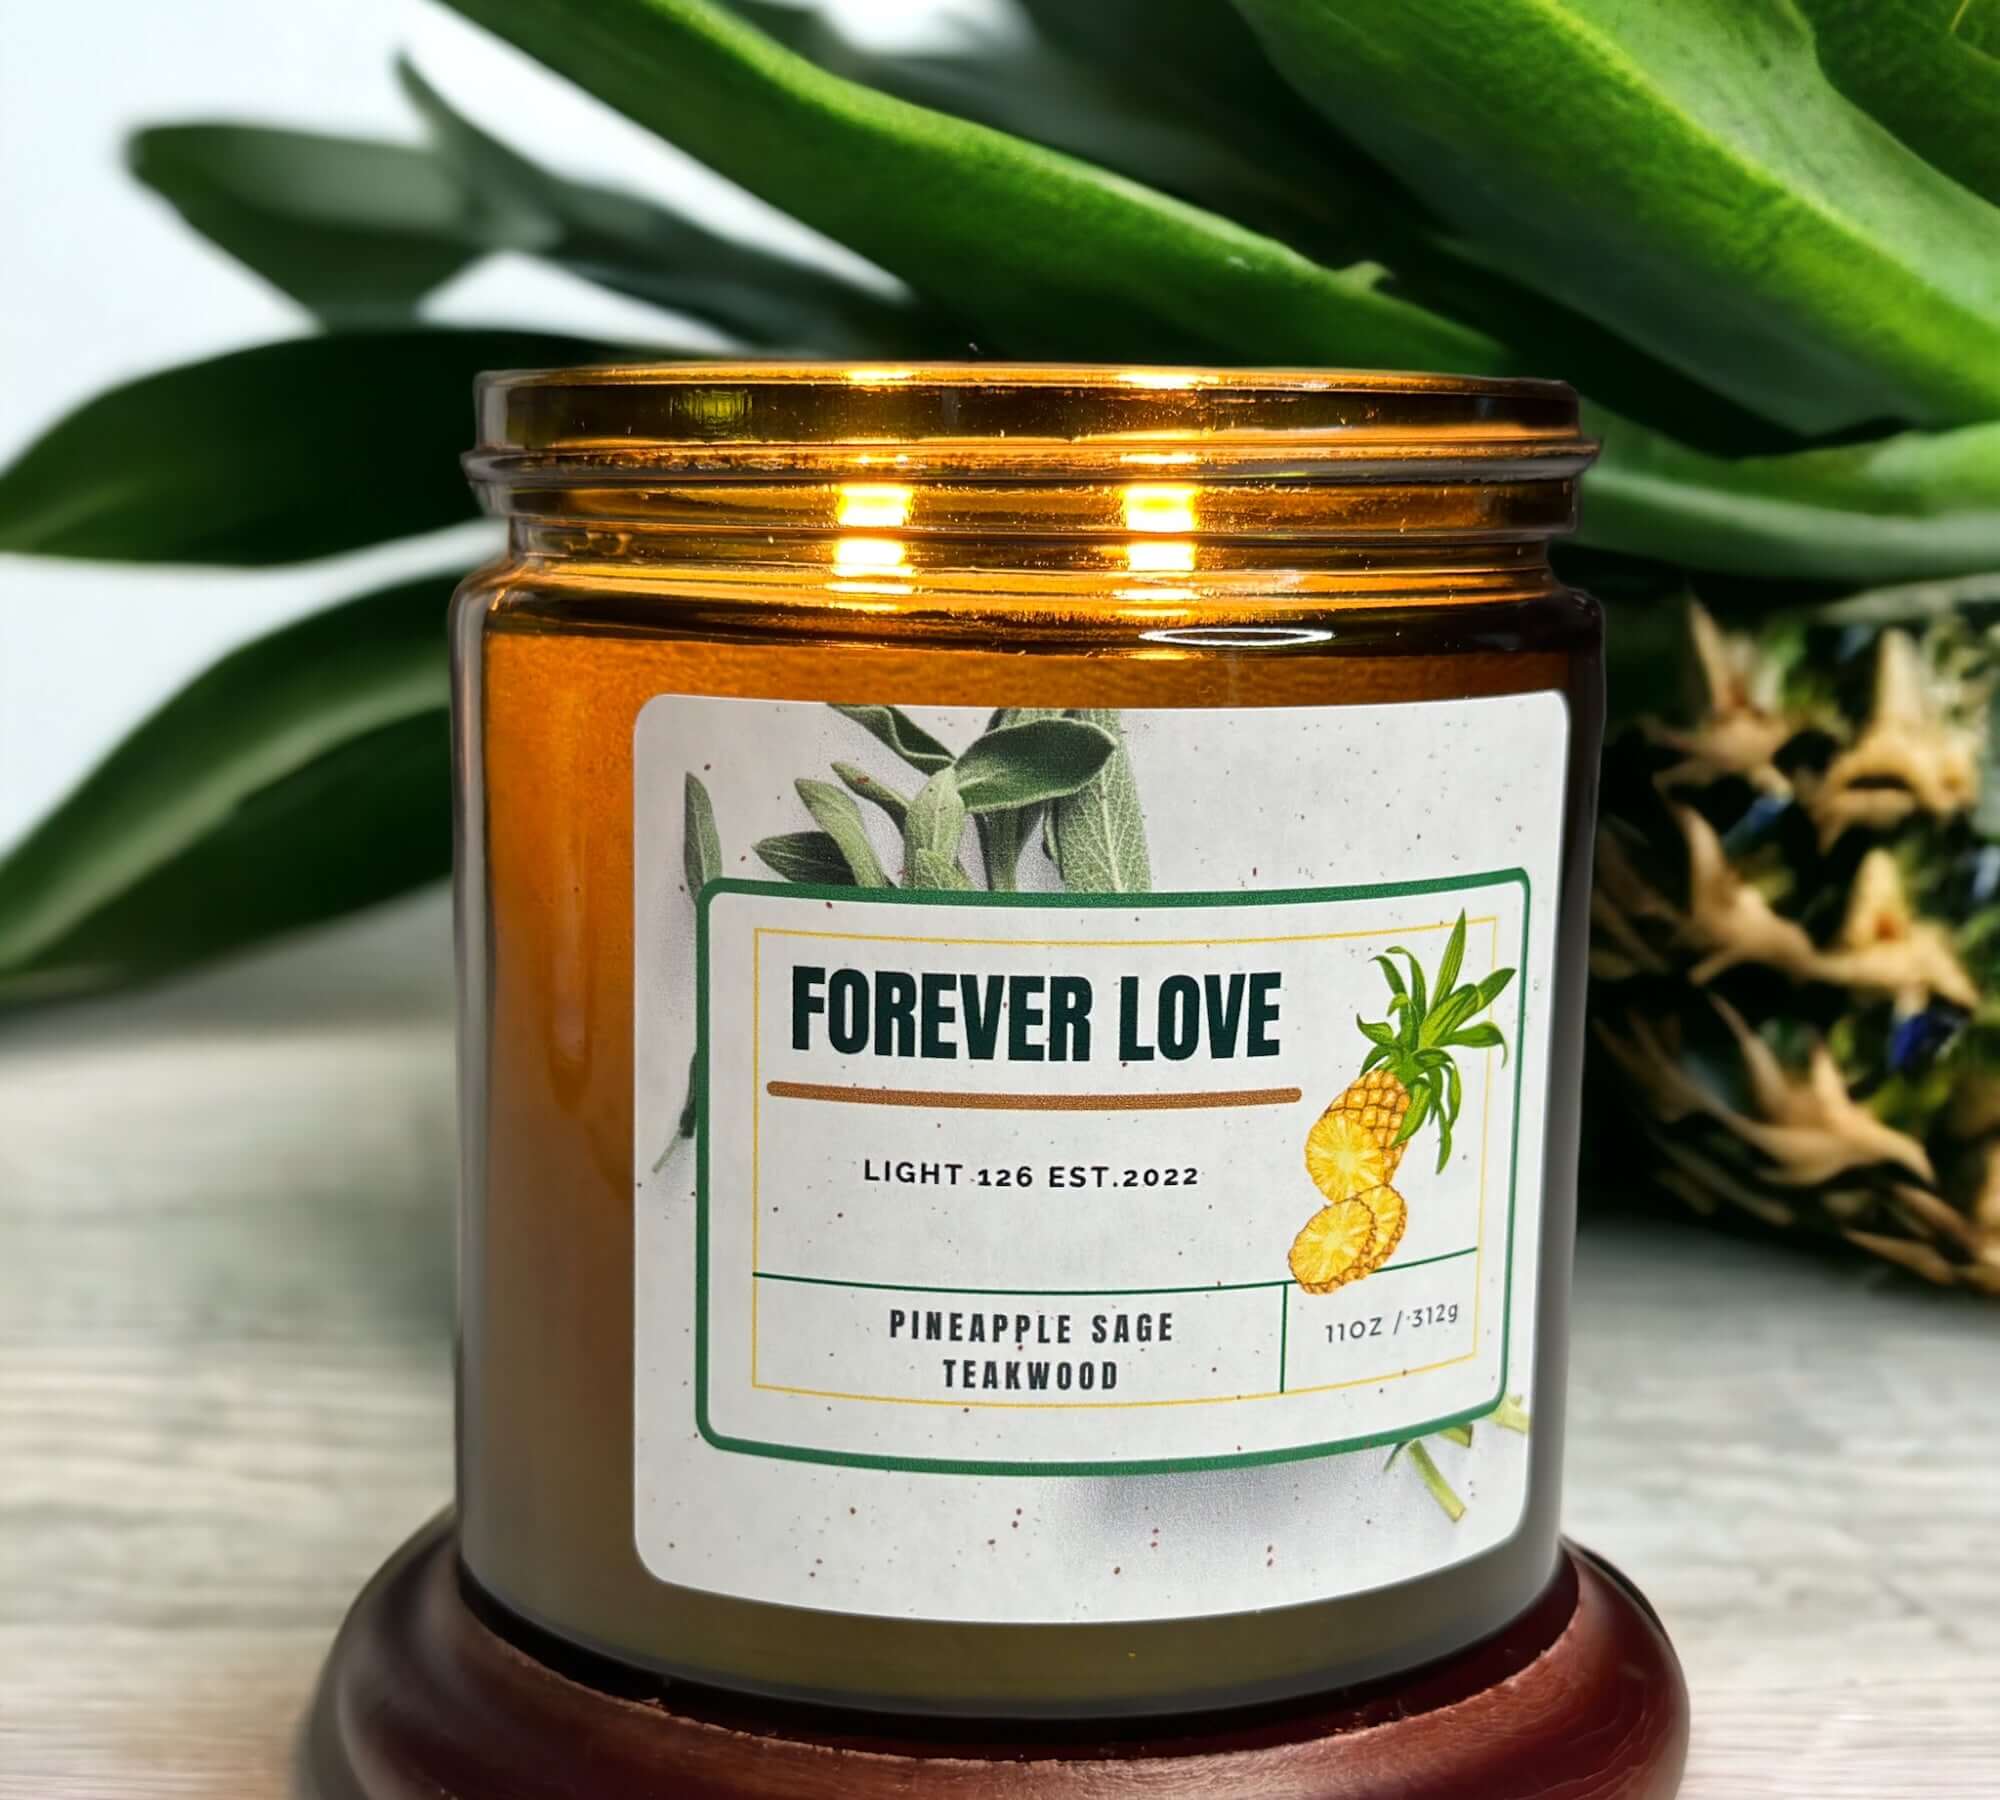 Forever Love candle. Pineapple sage and Teakwood fragrance